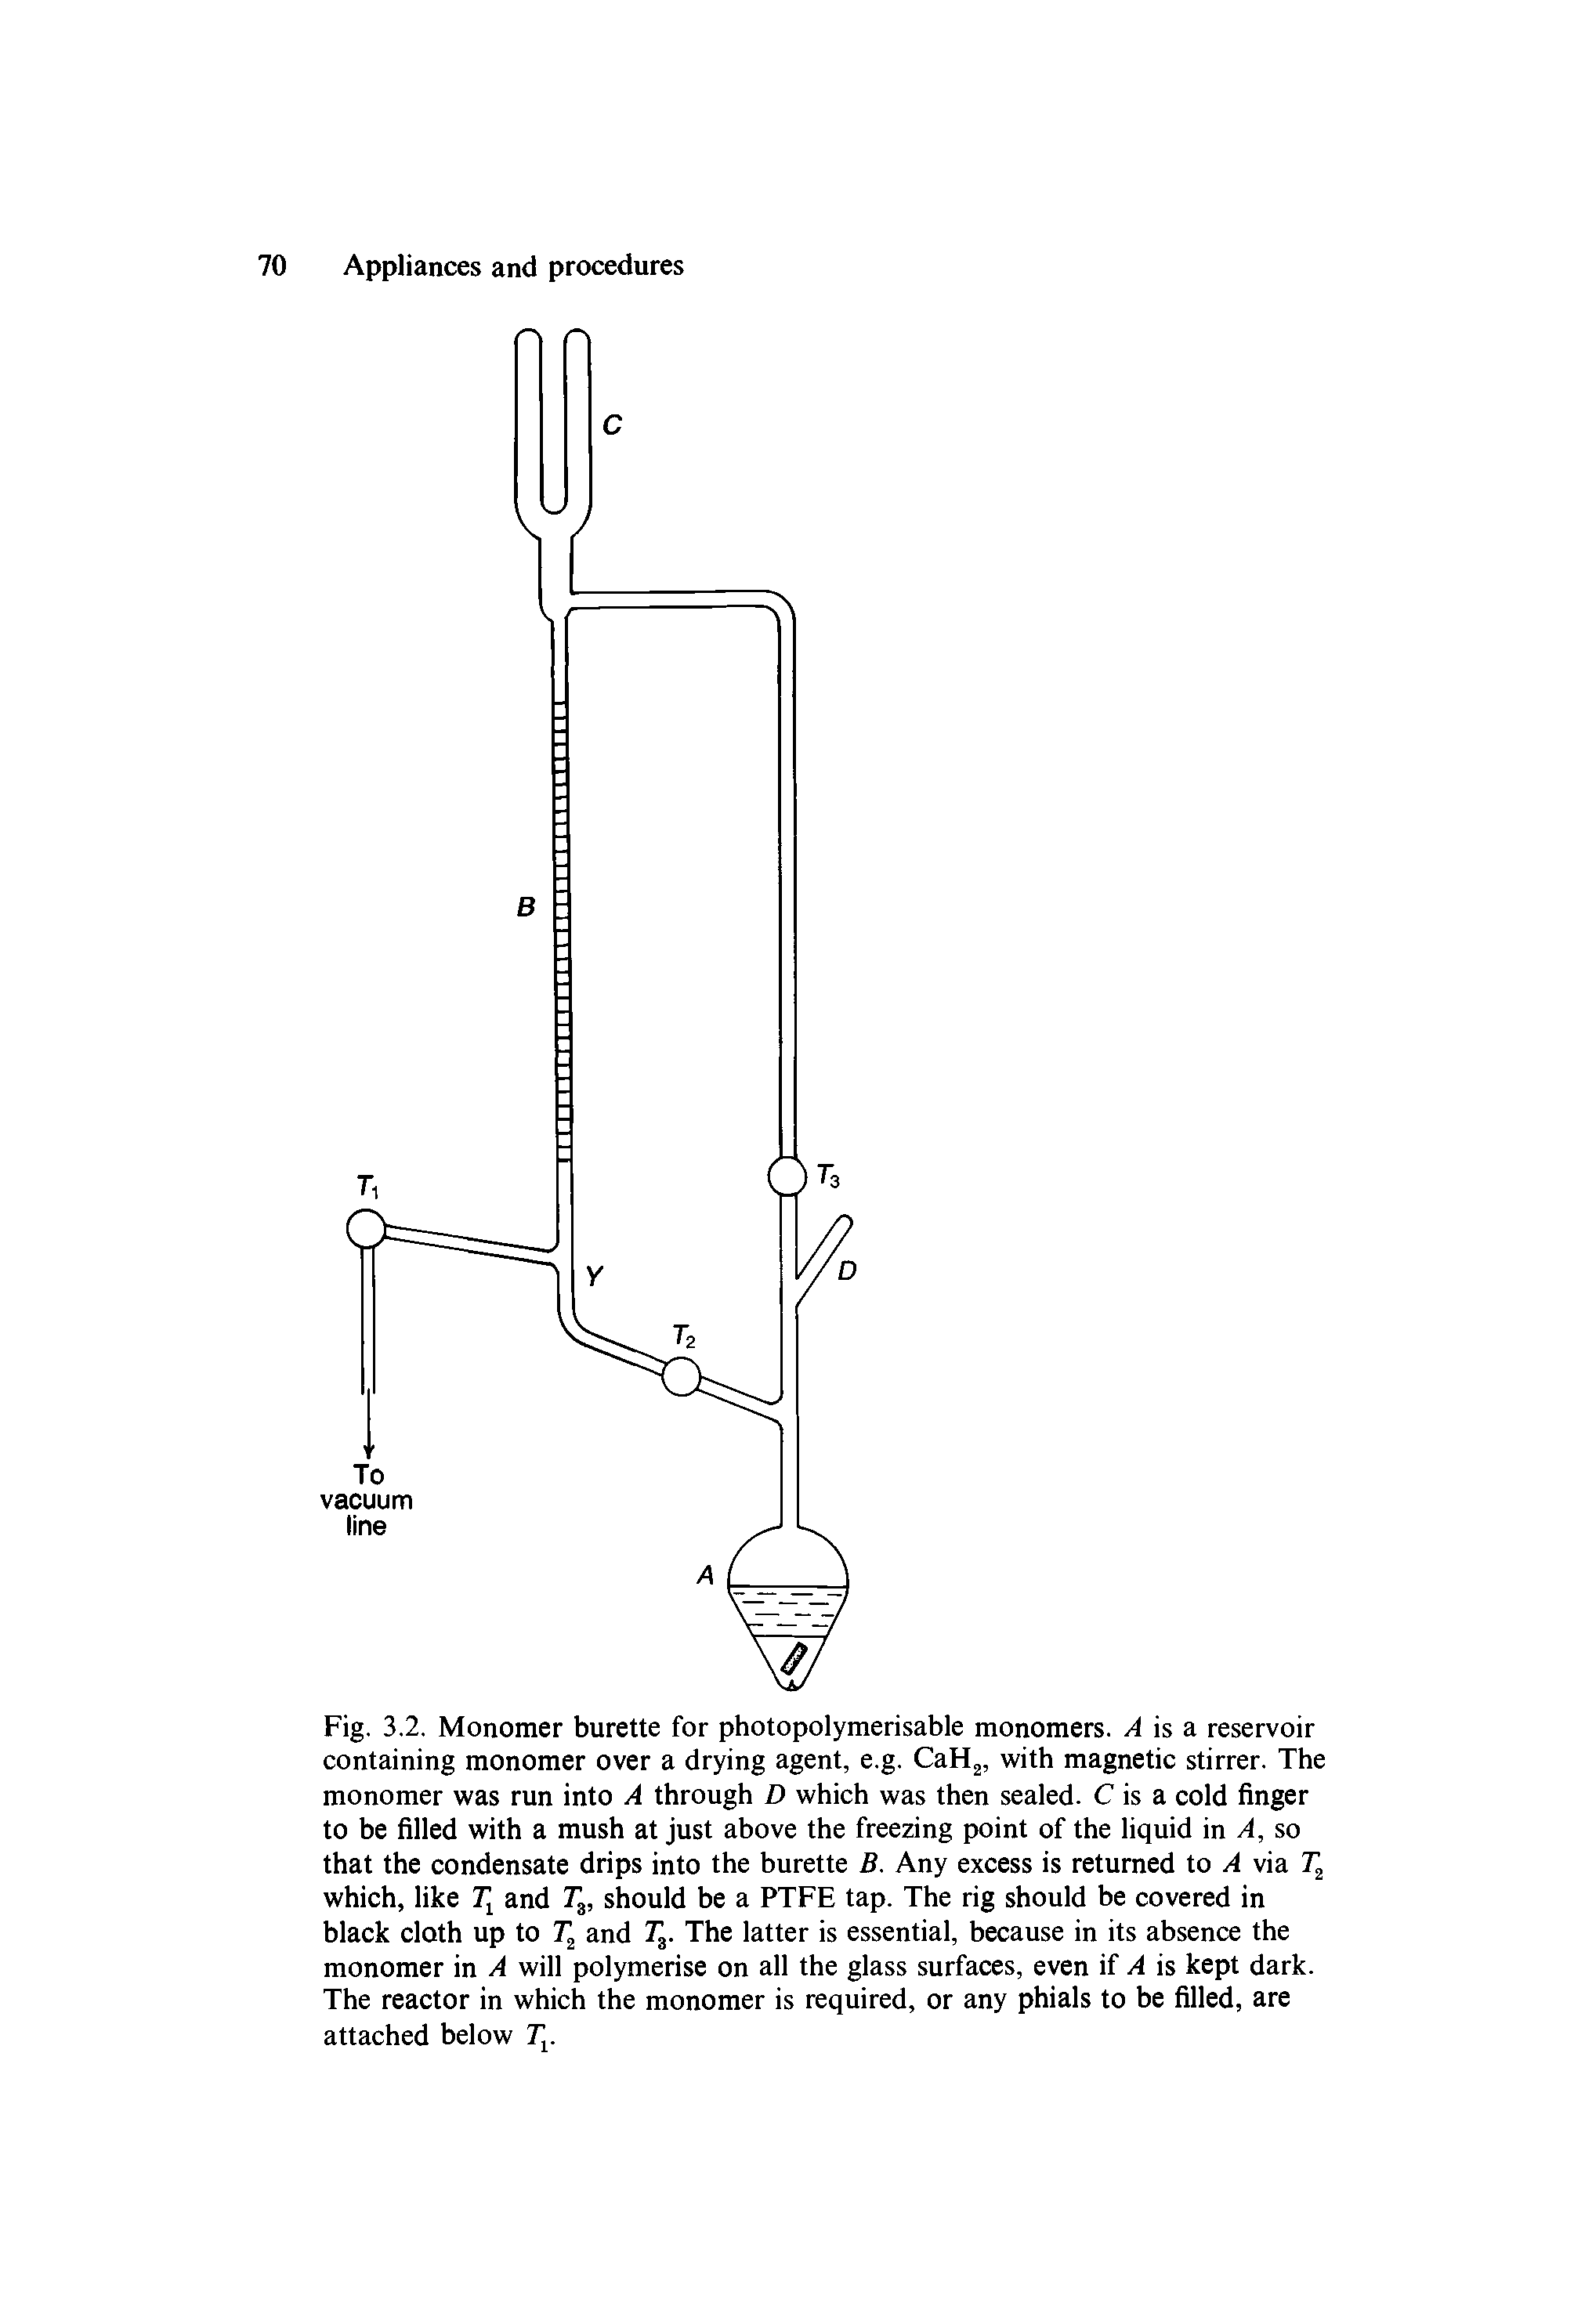 Fig. 3.2. Monomer burette for photopolymerisable monomers. is a reservoir containing monomer over a drying agent, e.g. CaH, with magnetic stirrer. The monomer was run into A through D which was then sealed. C is a cold finger to be filled with a mush at just above the freezing point of the liquid in A, so that the condensate drips into the burette B. Any excess is returned to A via which, like and T, should be a PTFE tap. The rig should be covered in black cloth up to and 7. The latter is essential, because in its absence the monomer in A will polymerise on all the glass surfaces, even if A is kept dark. The reactor in which the monomer is required, or any phials to be filled, are attached below T. ...